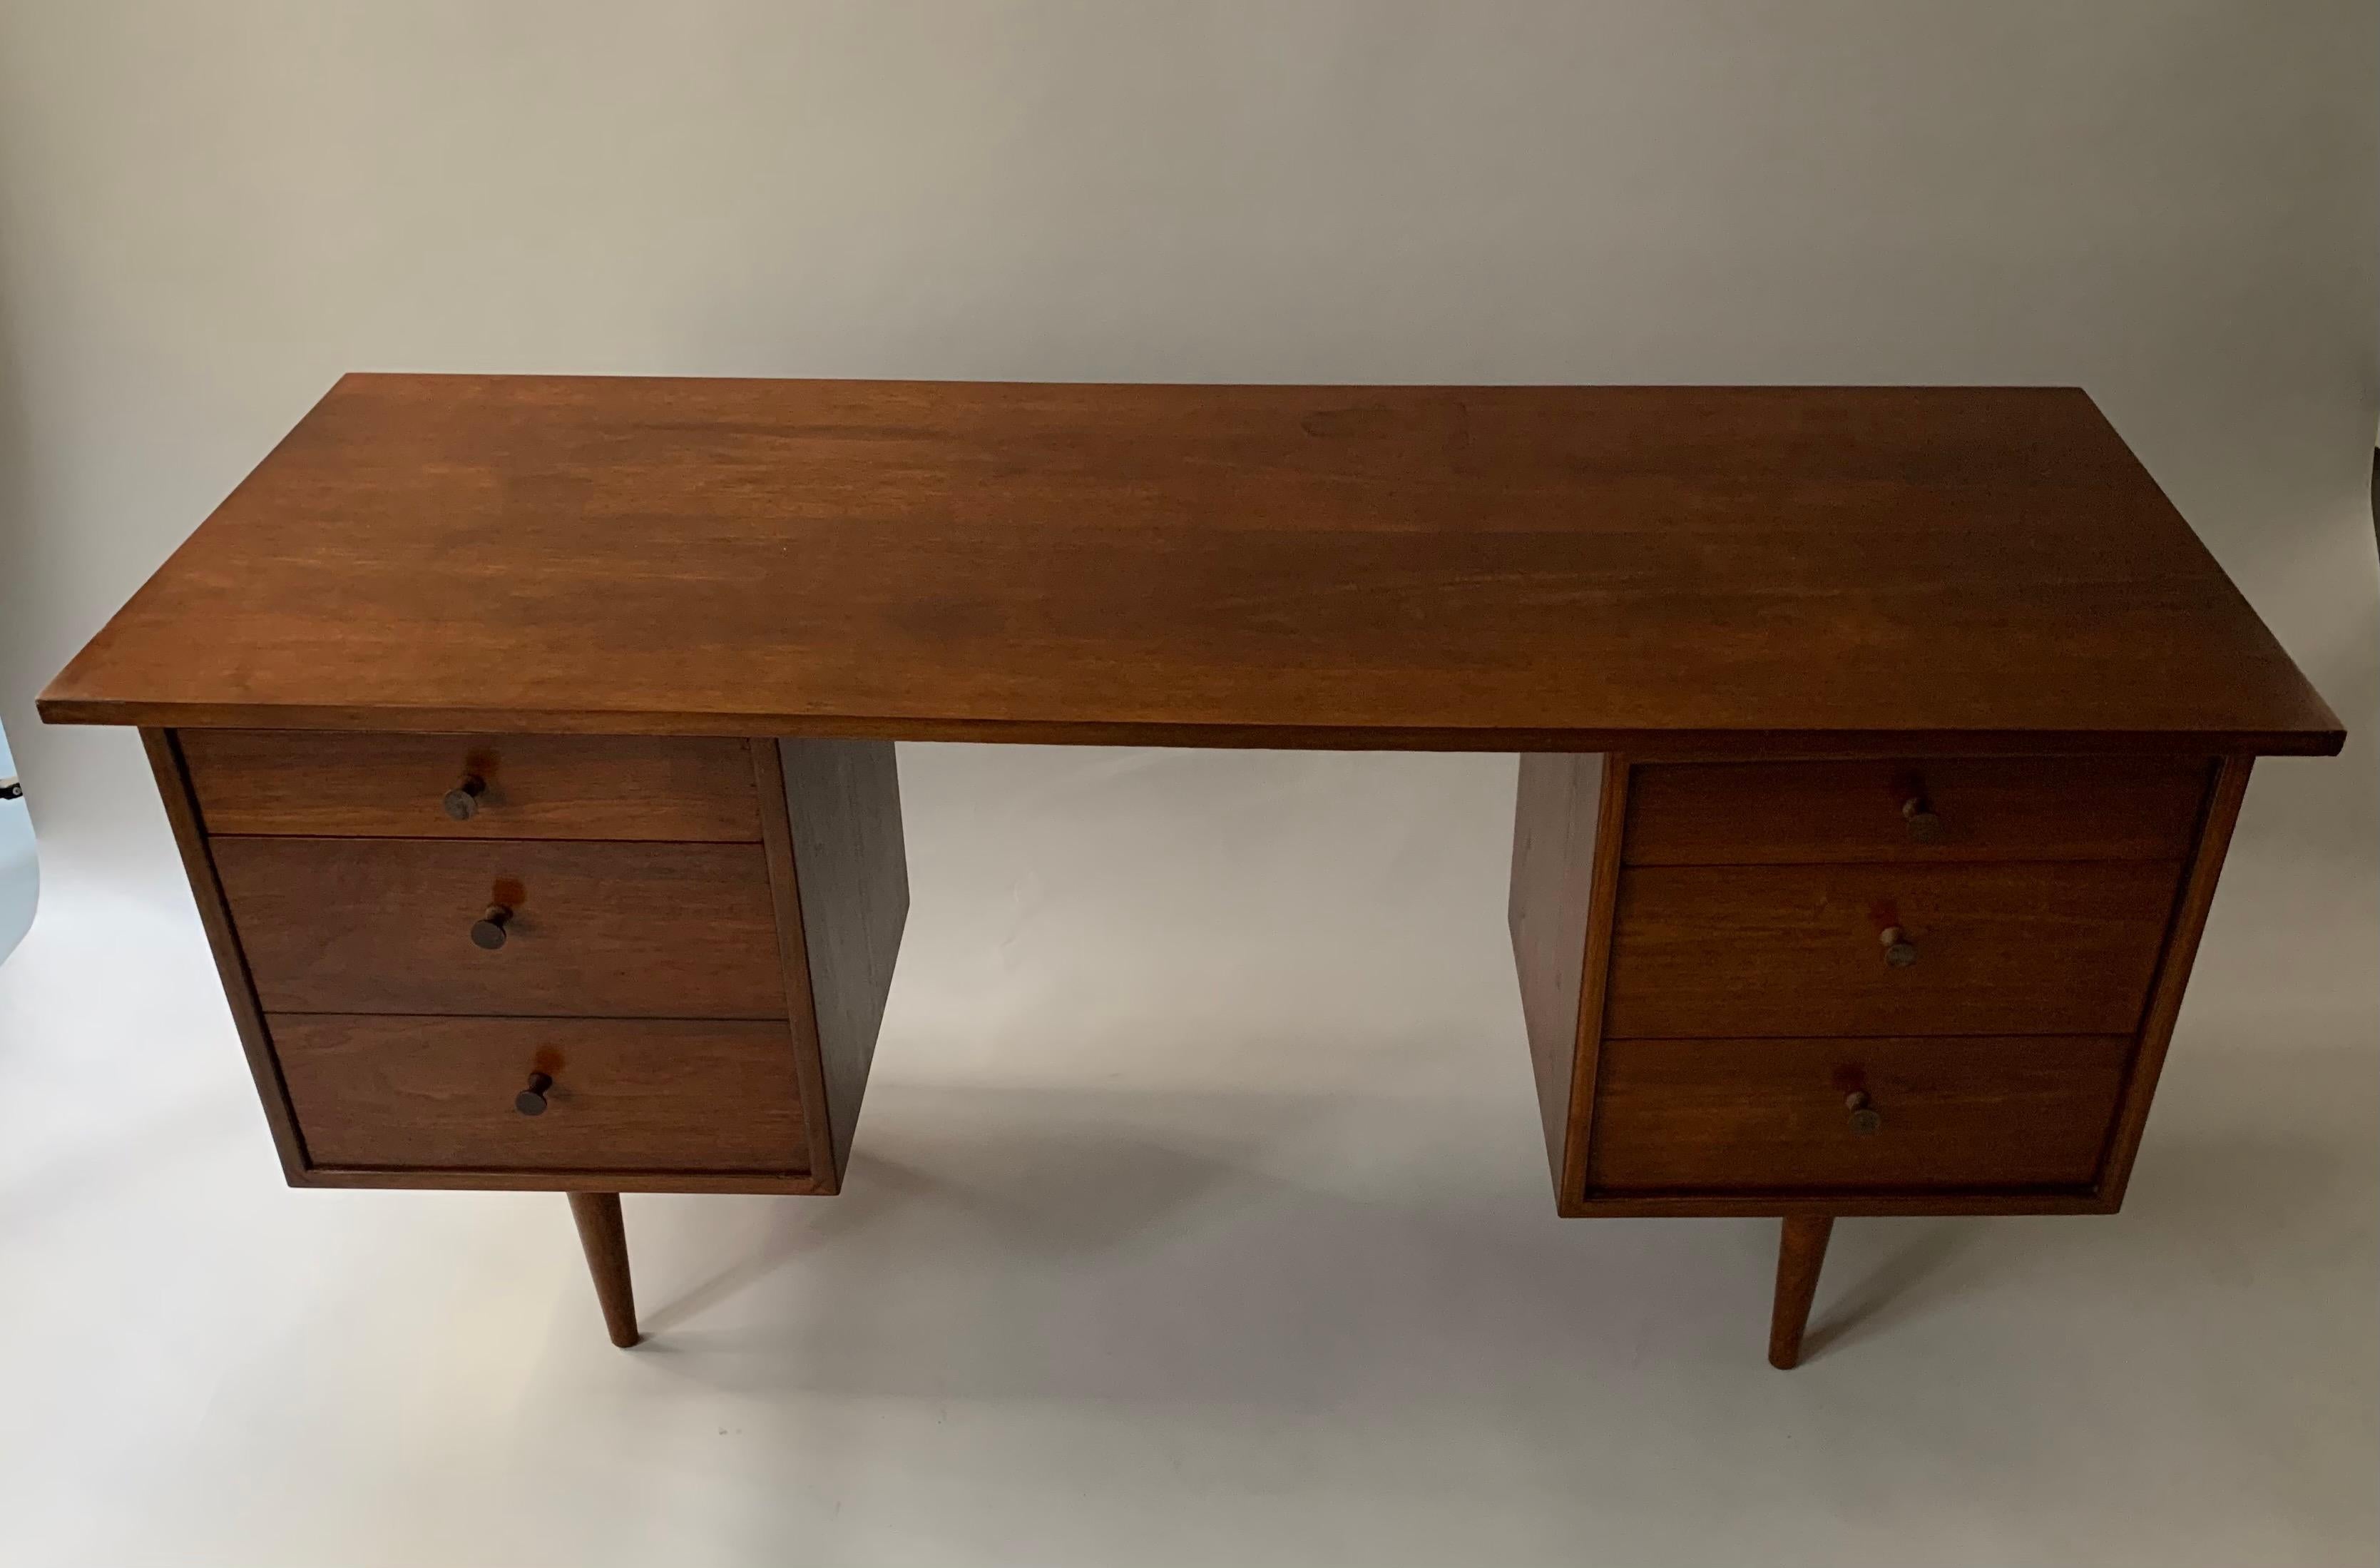 Walnut desk by renowned painter and sculptor, Richard Artschwager, who in 1953 designed a small collection of furniture in New York City. These pieces are scarce, as production and scope of design were exceedingly limited. 
Richard Artschwager